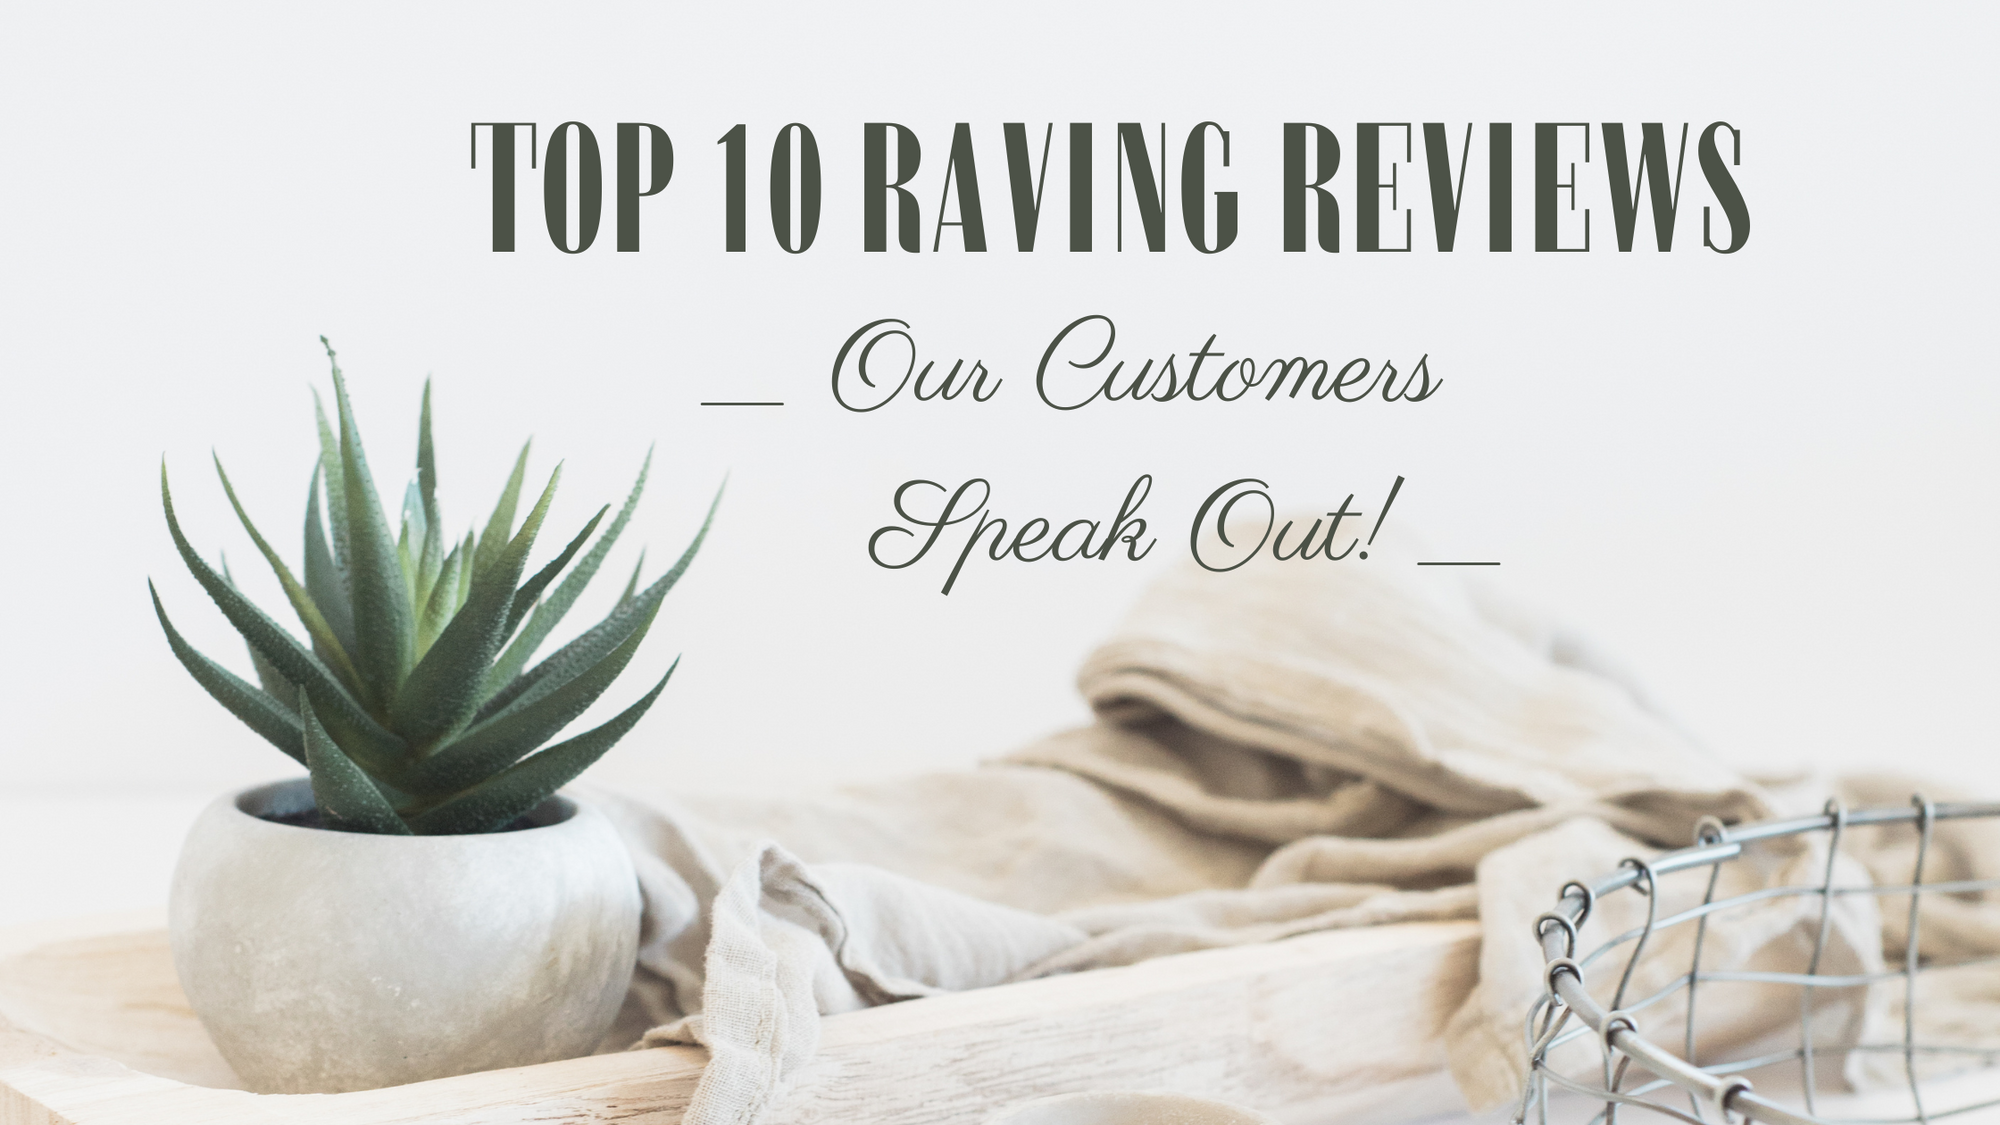 Top 10 Raving Reviews: Our Customers Speak Out! - January 15th